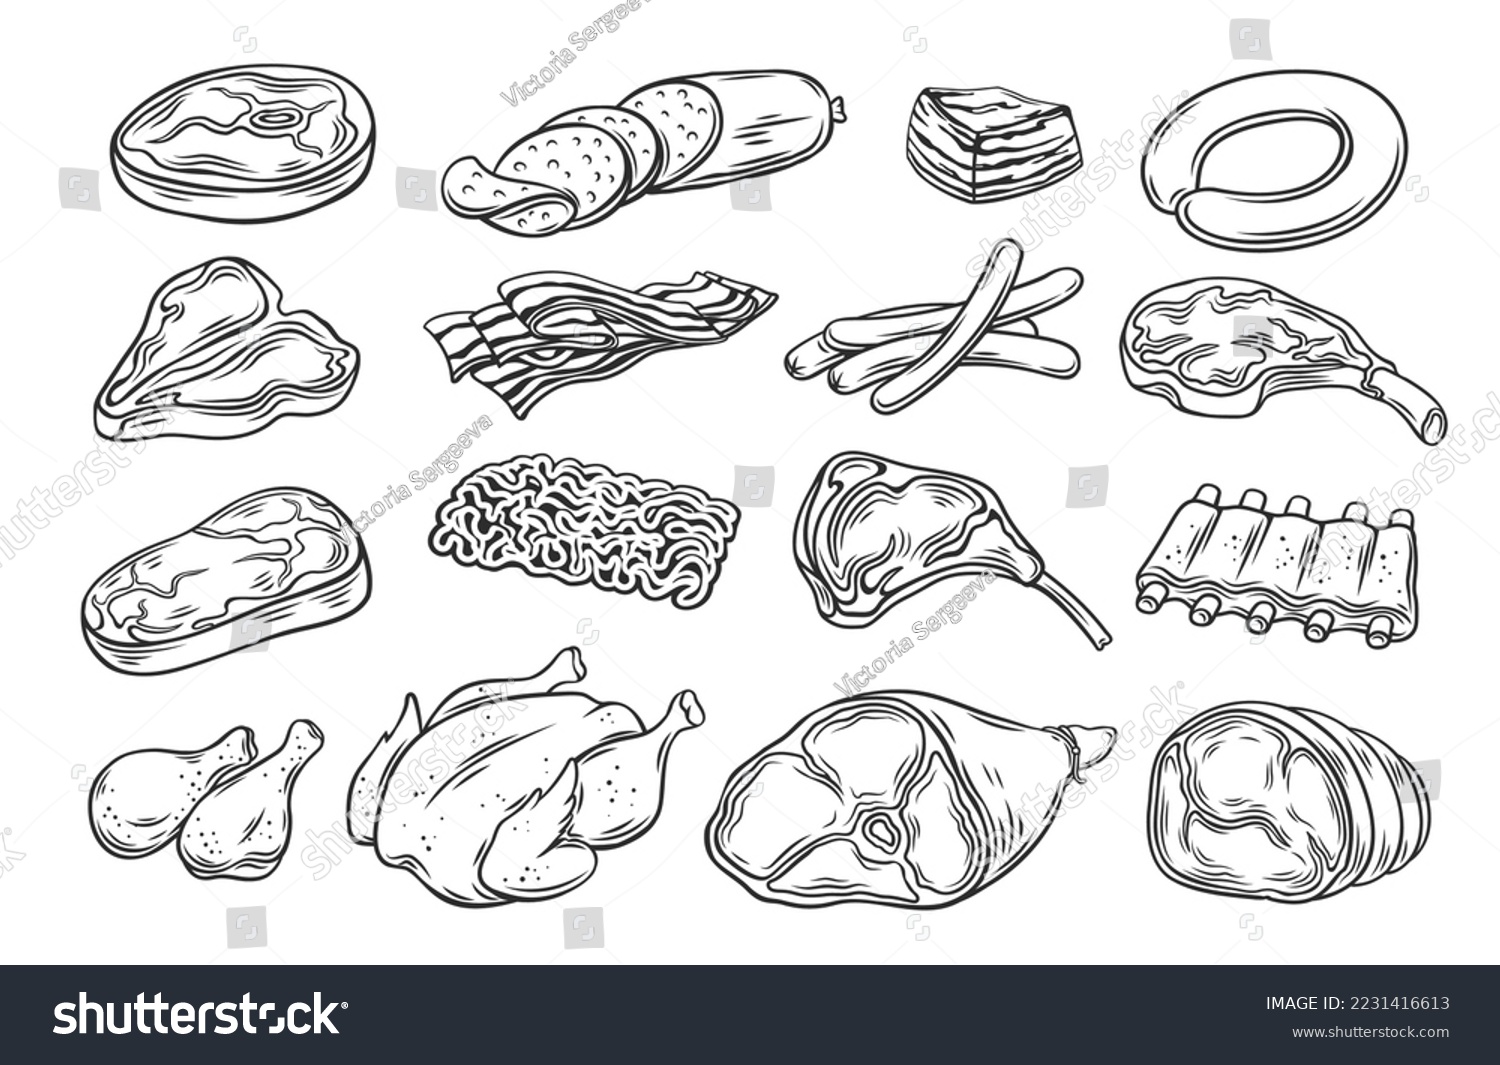 Meat products outline icons set vector illustration. Line hand drawn meat butchers menu collection with ham and smoked sausages, raw beef and pork steak, whole turkey and chicken for cooking #2231416613